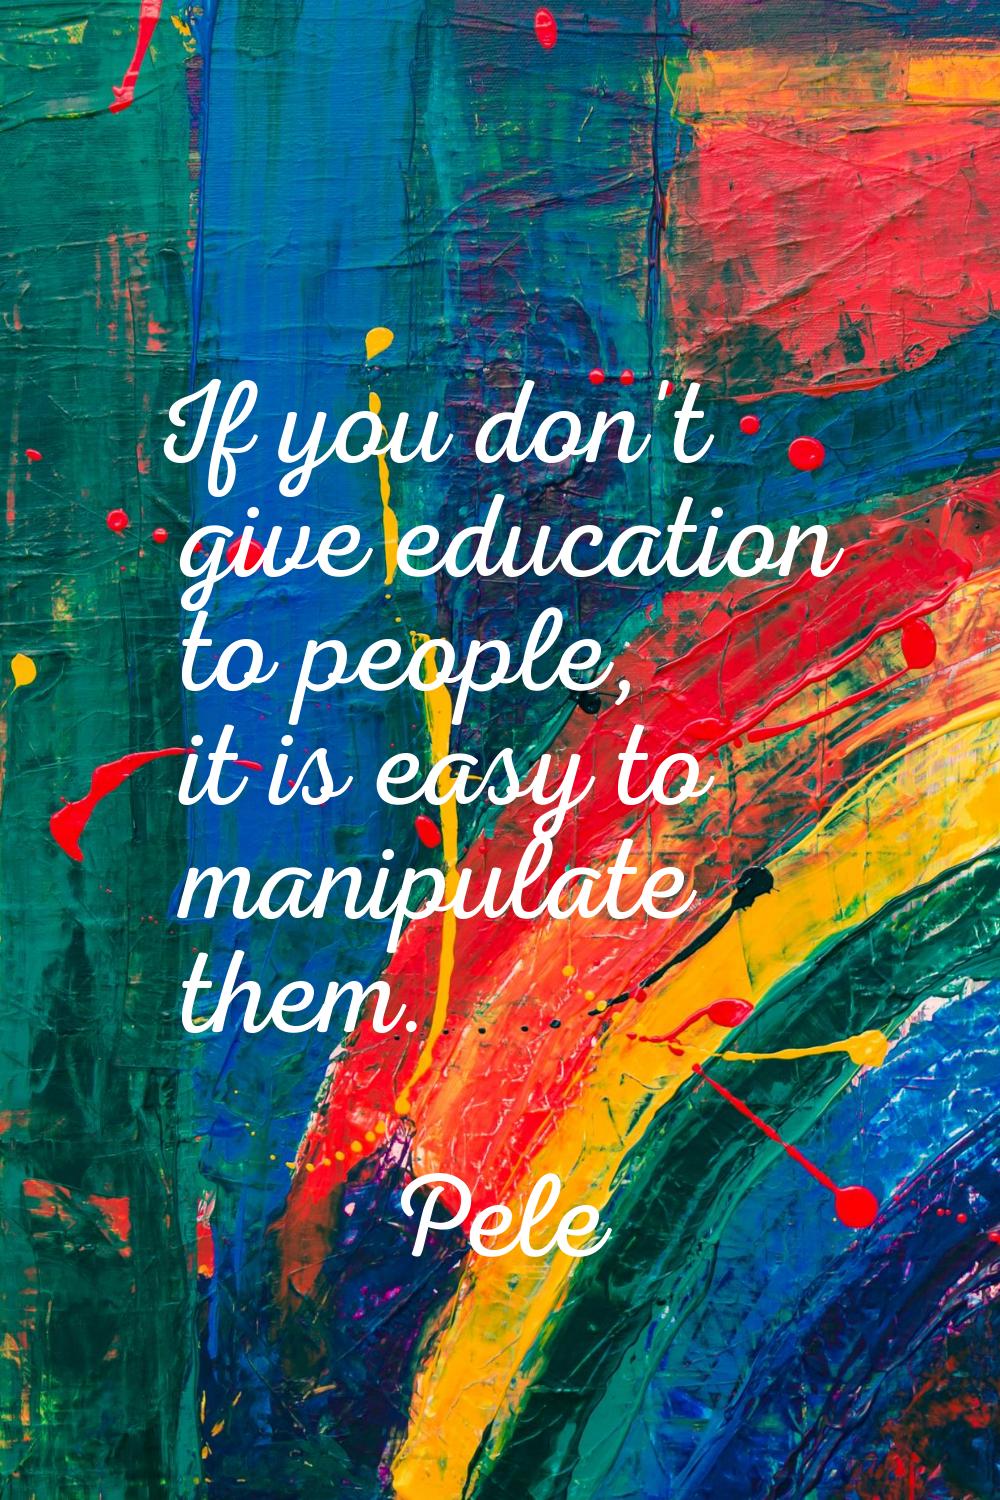 If you don't give education to people, it is easy to manipulate them.